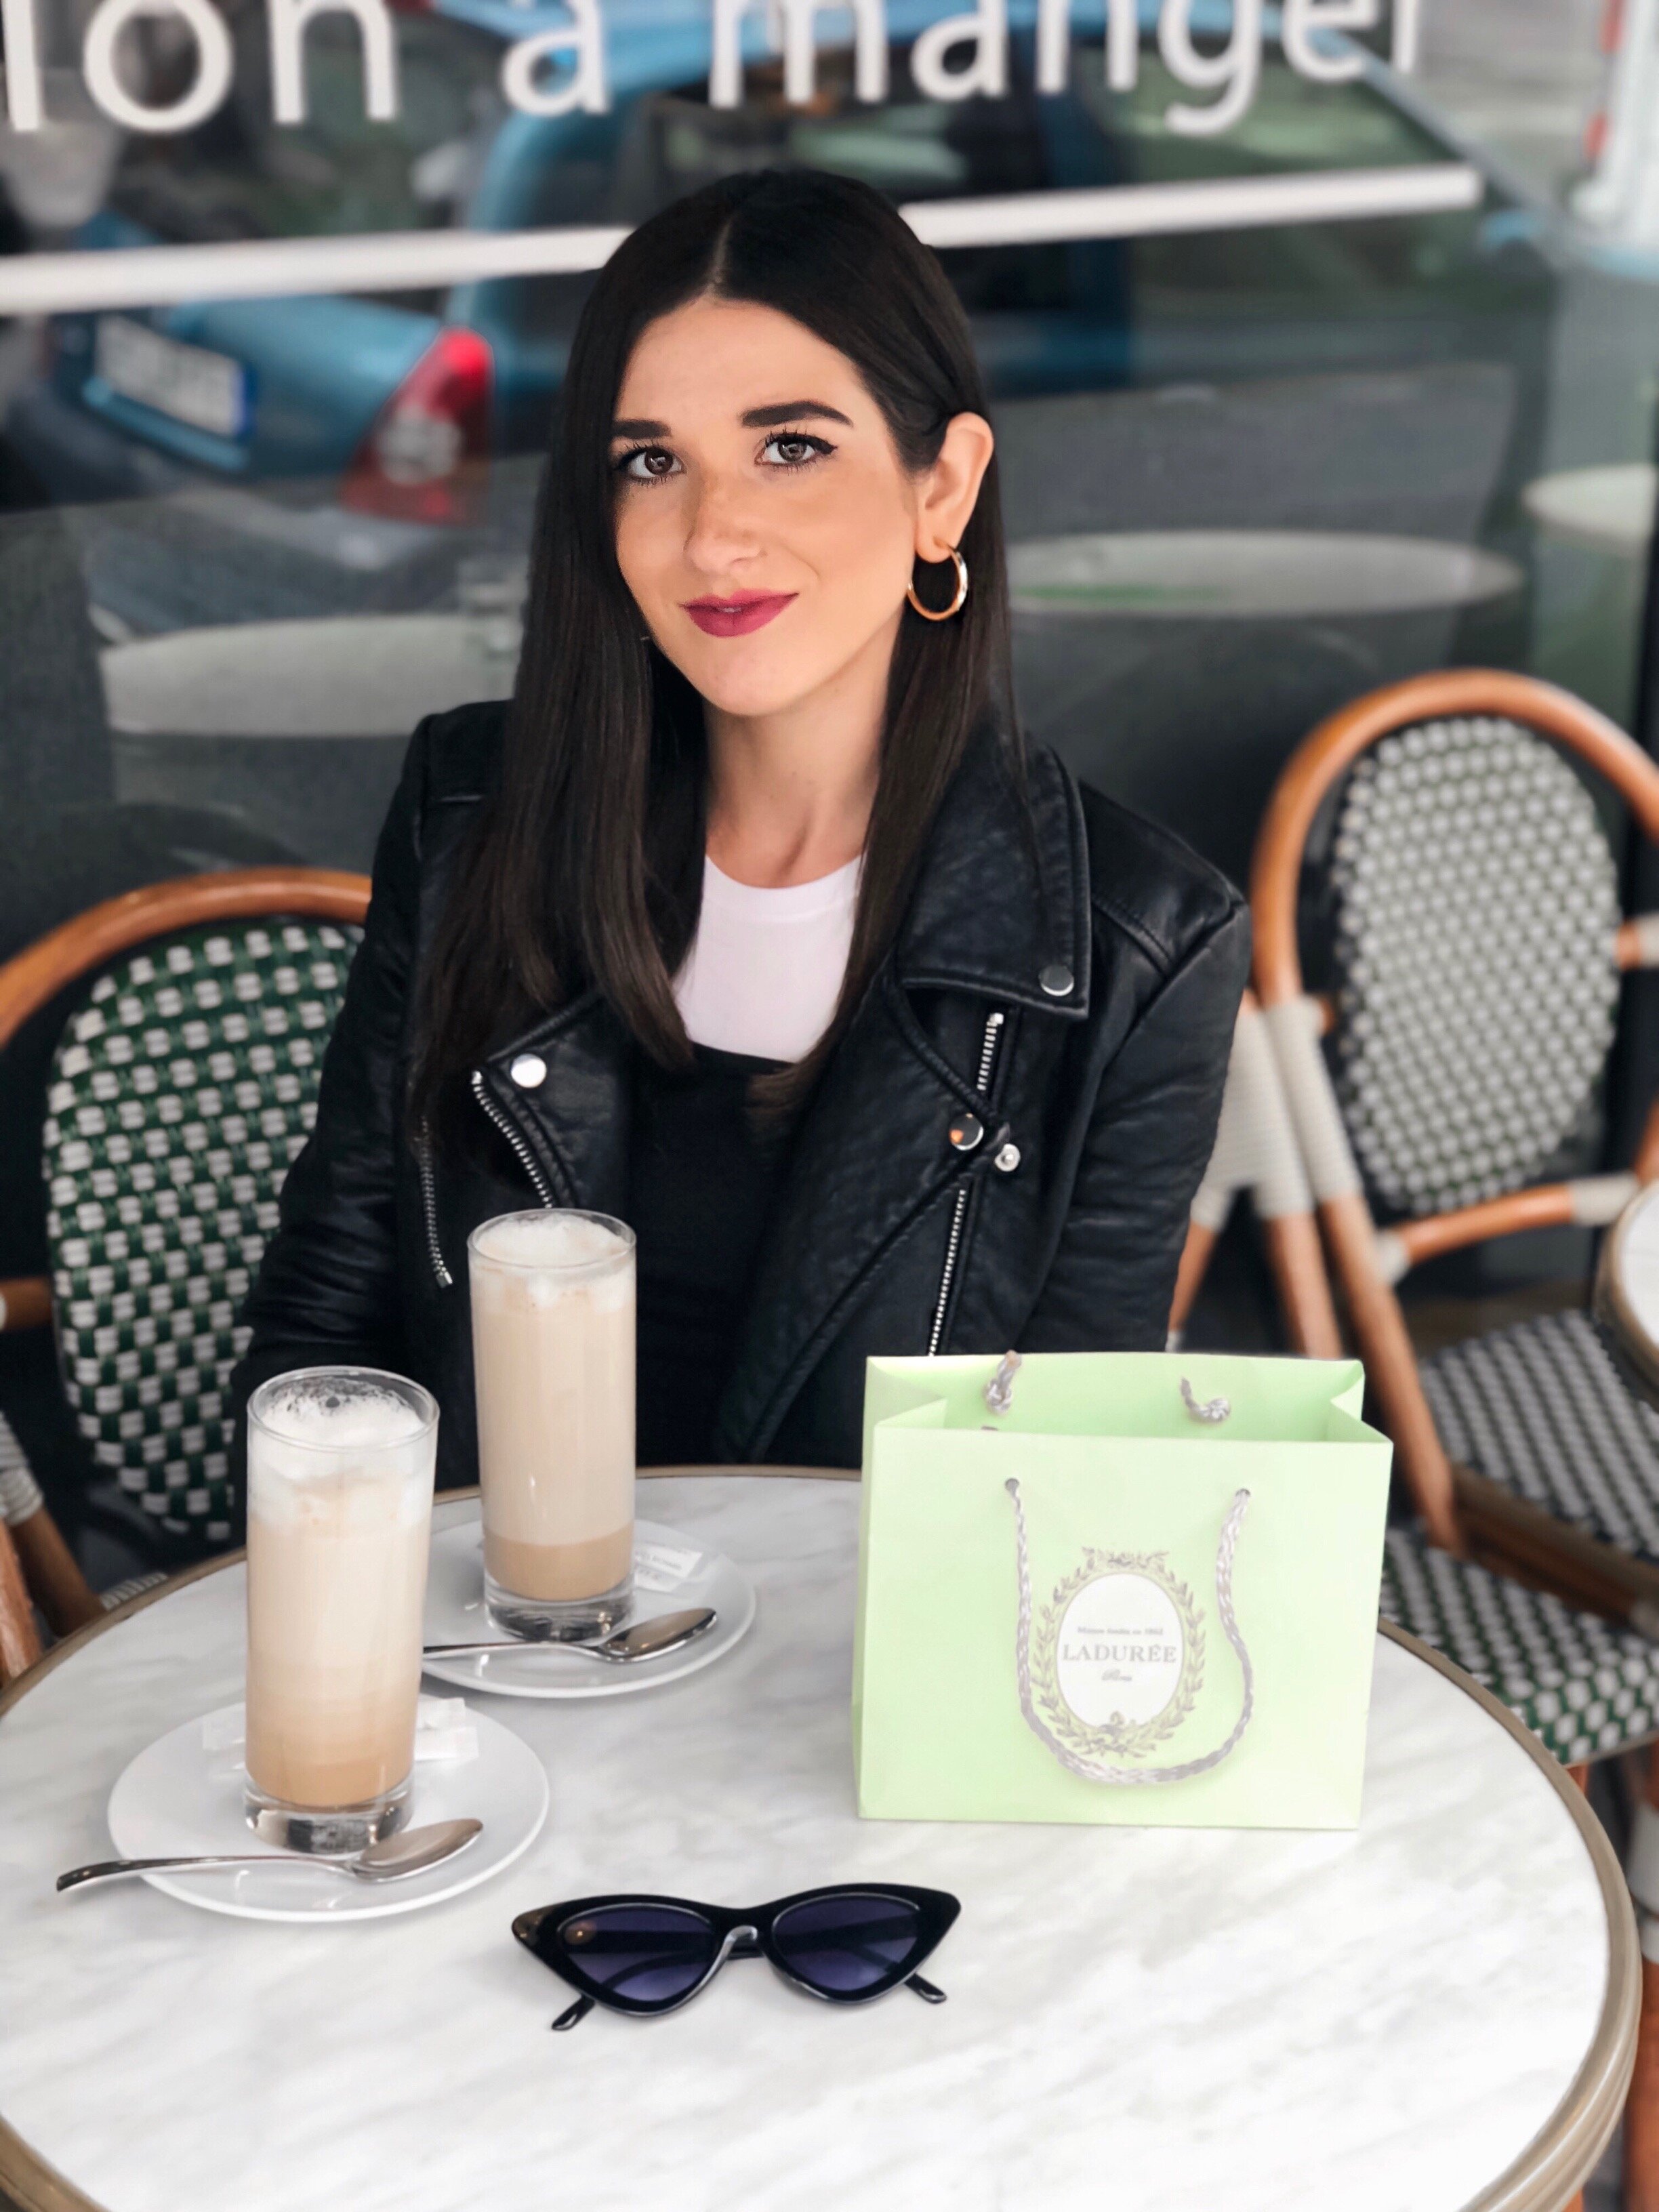 My Top 10 Favorite Spots In Paris Esther Santer NYC Street Style Blogger Travel Outfit What To Do Where To Go Tourist Attractions Saint Germain Moulin Rouge Black and White Pillars Eiffel Tower Versailles Laduree Recommendation France Saint Michel Bag.jpg